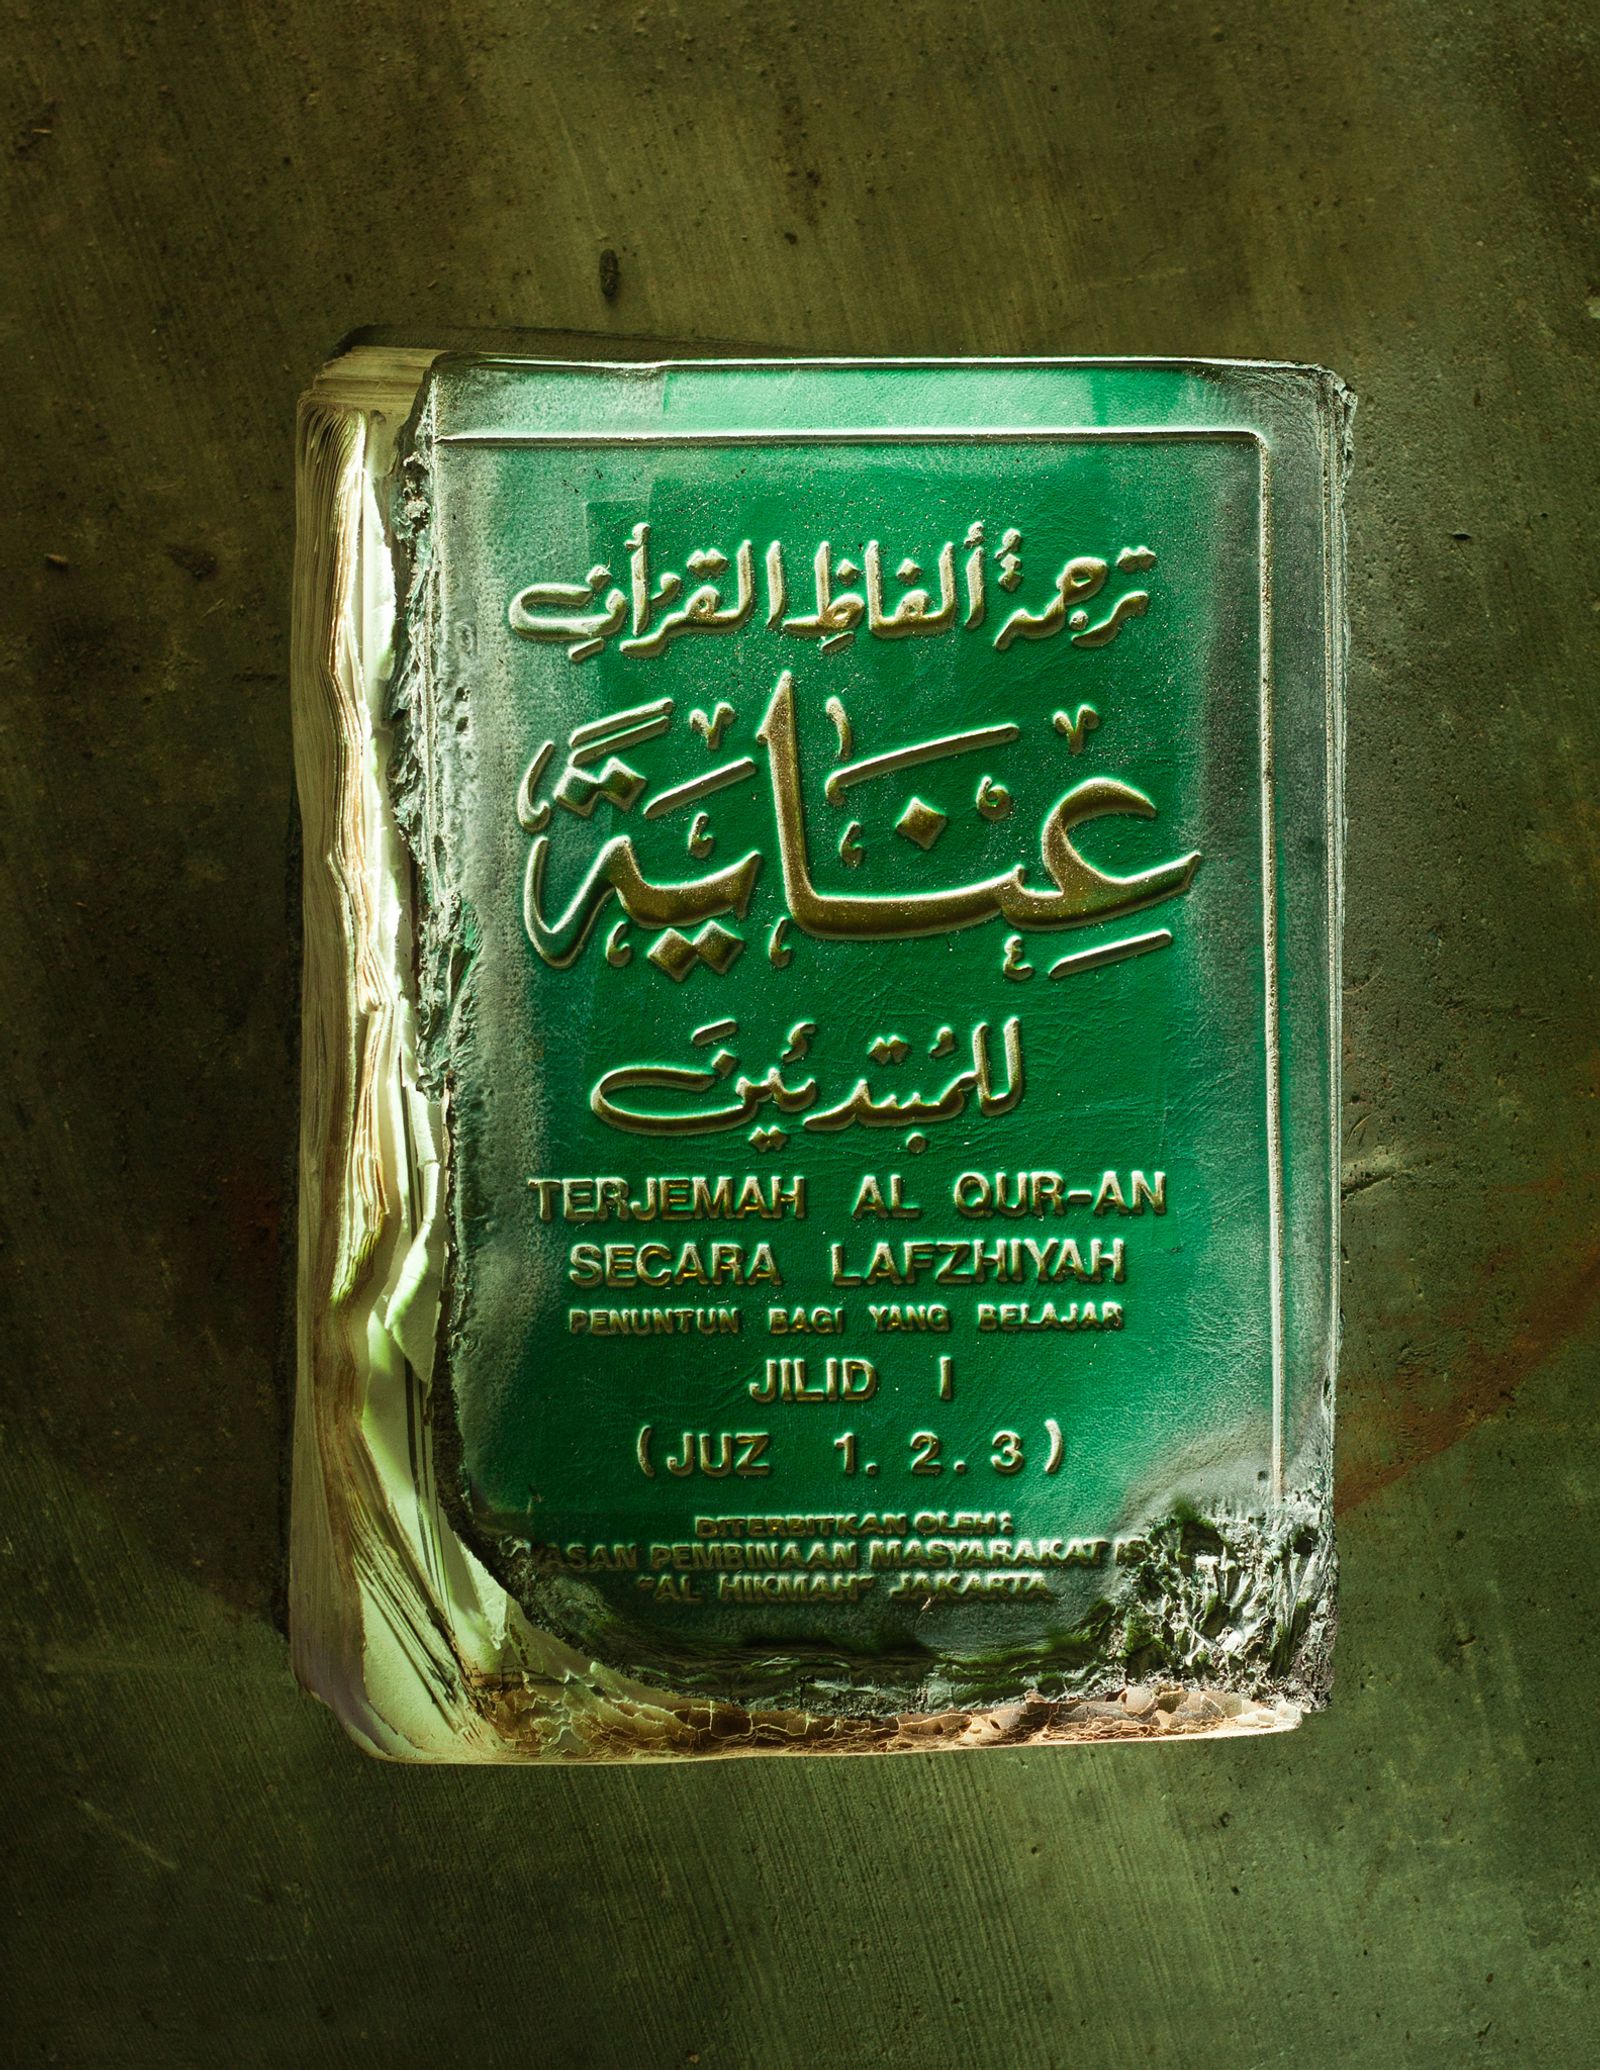 © Hahn Hartung - A Quran recovered from the ashes of the 2010 eruption of Mount Merapi.